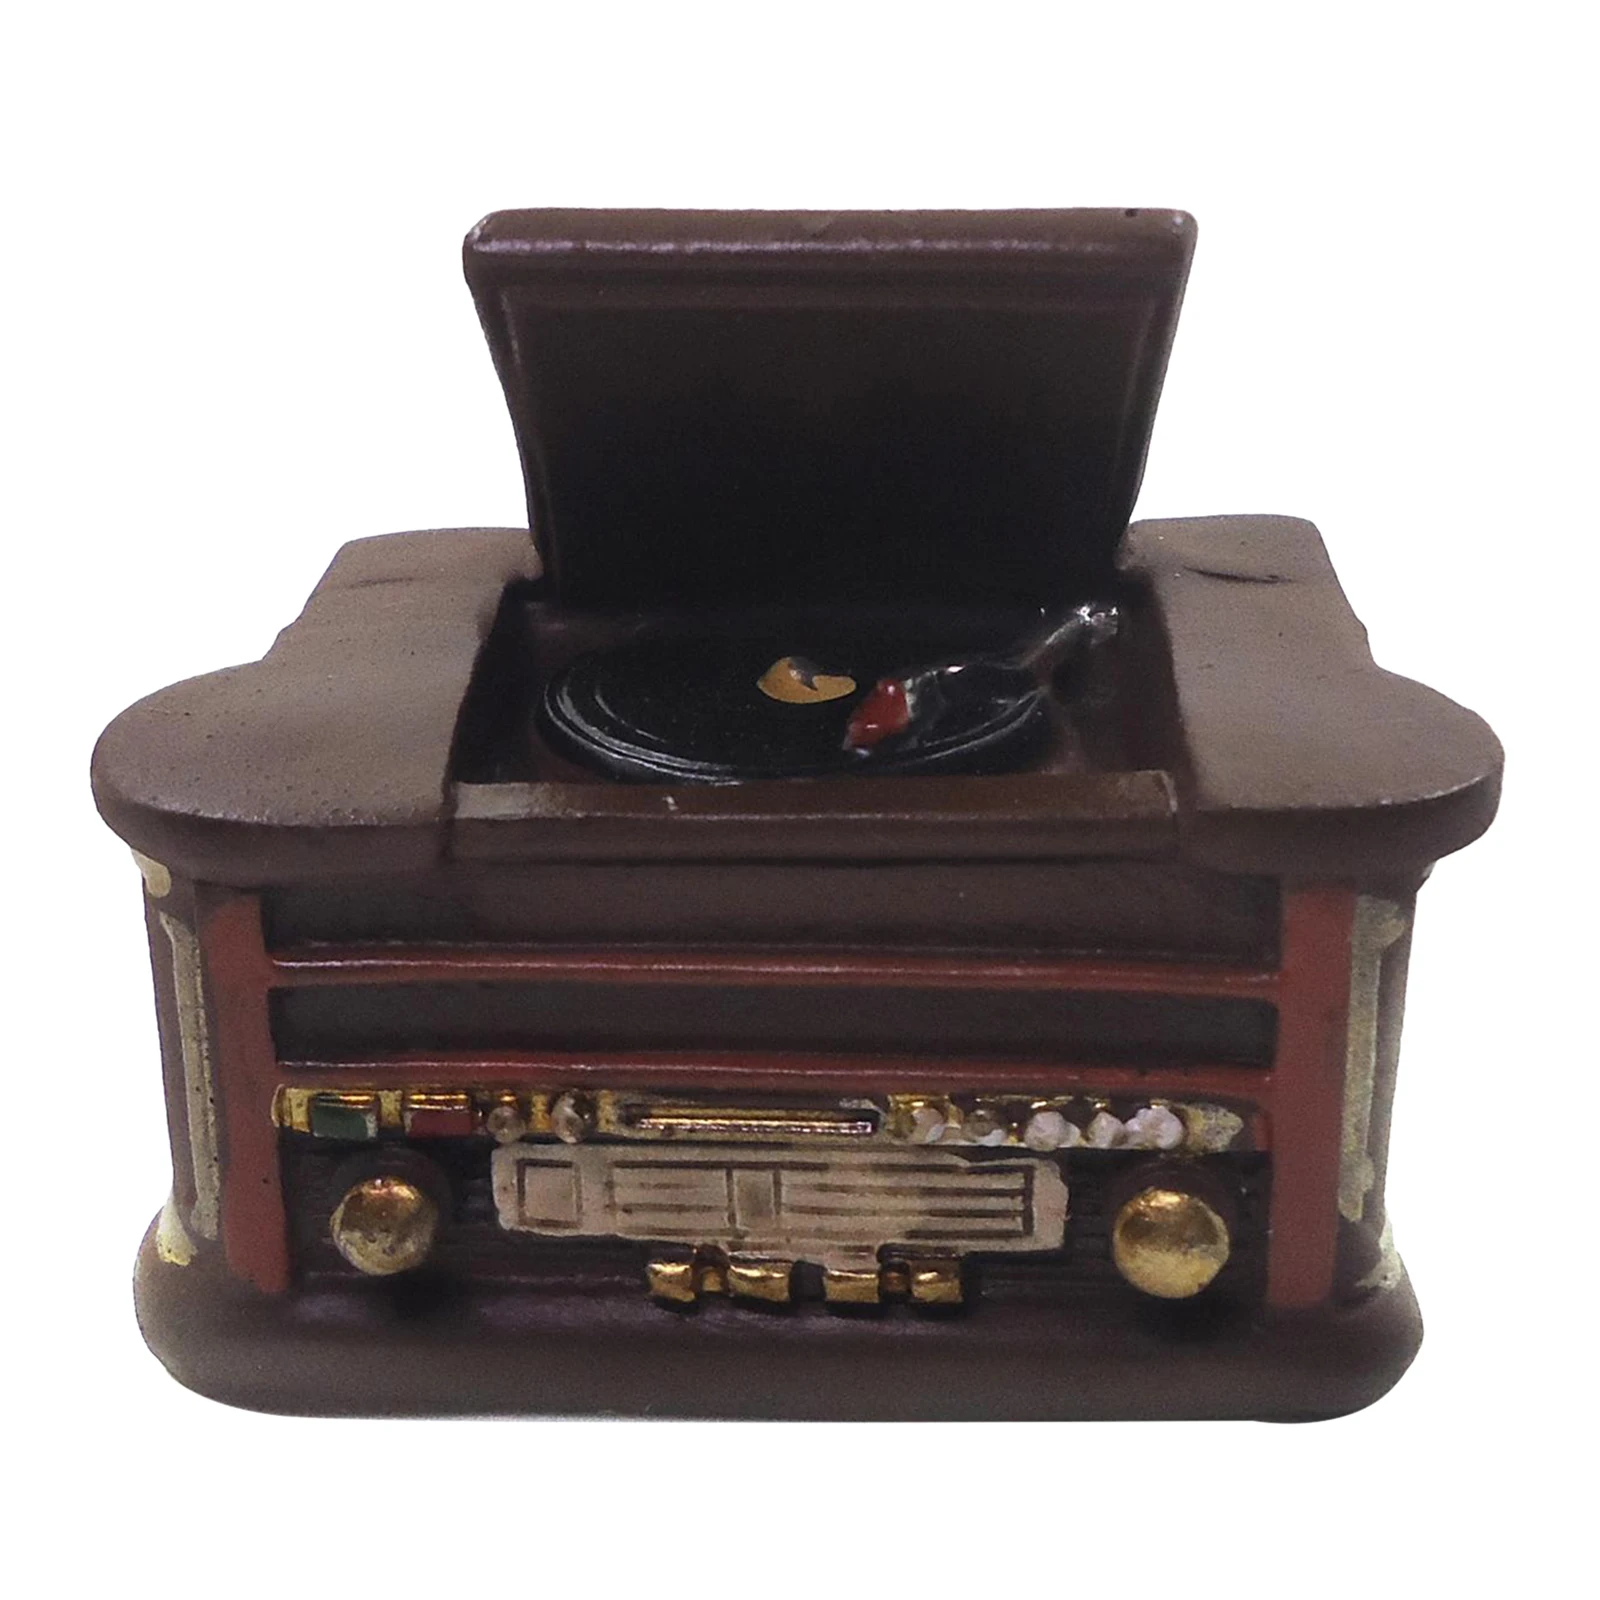 Retro 1/6 Scale Dolls House Resin Record Player Room Furniture Accessory